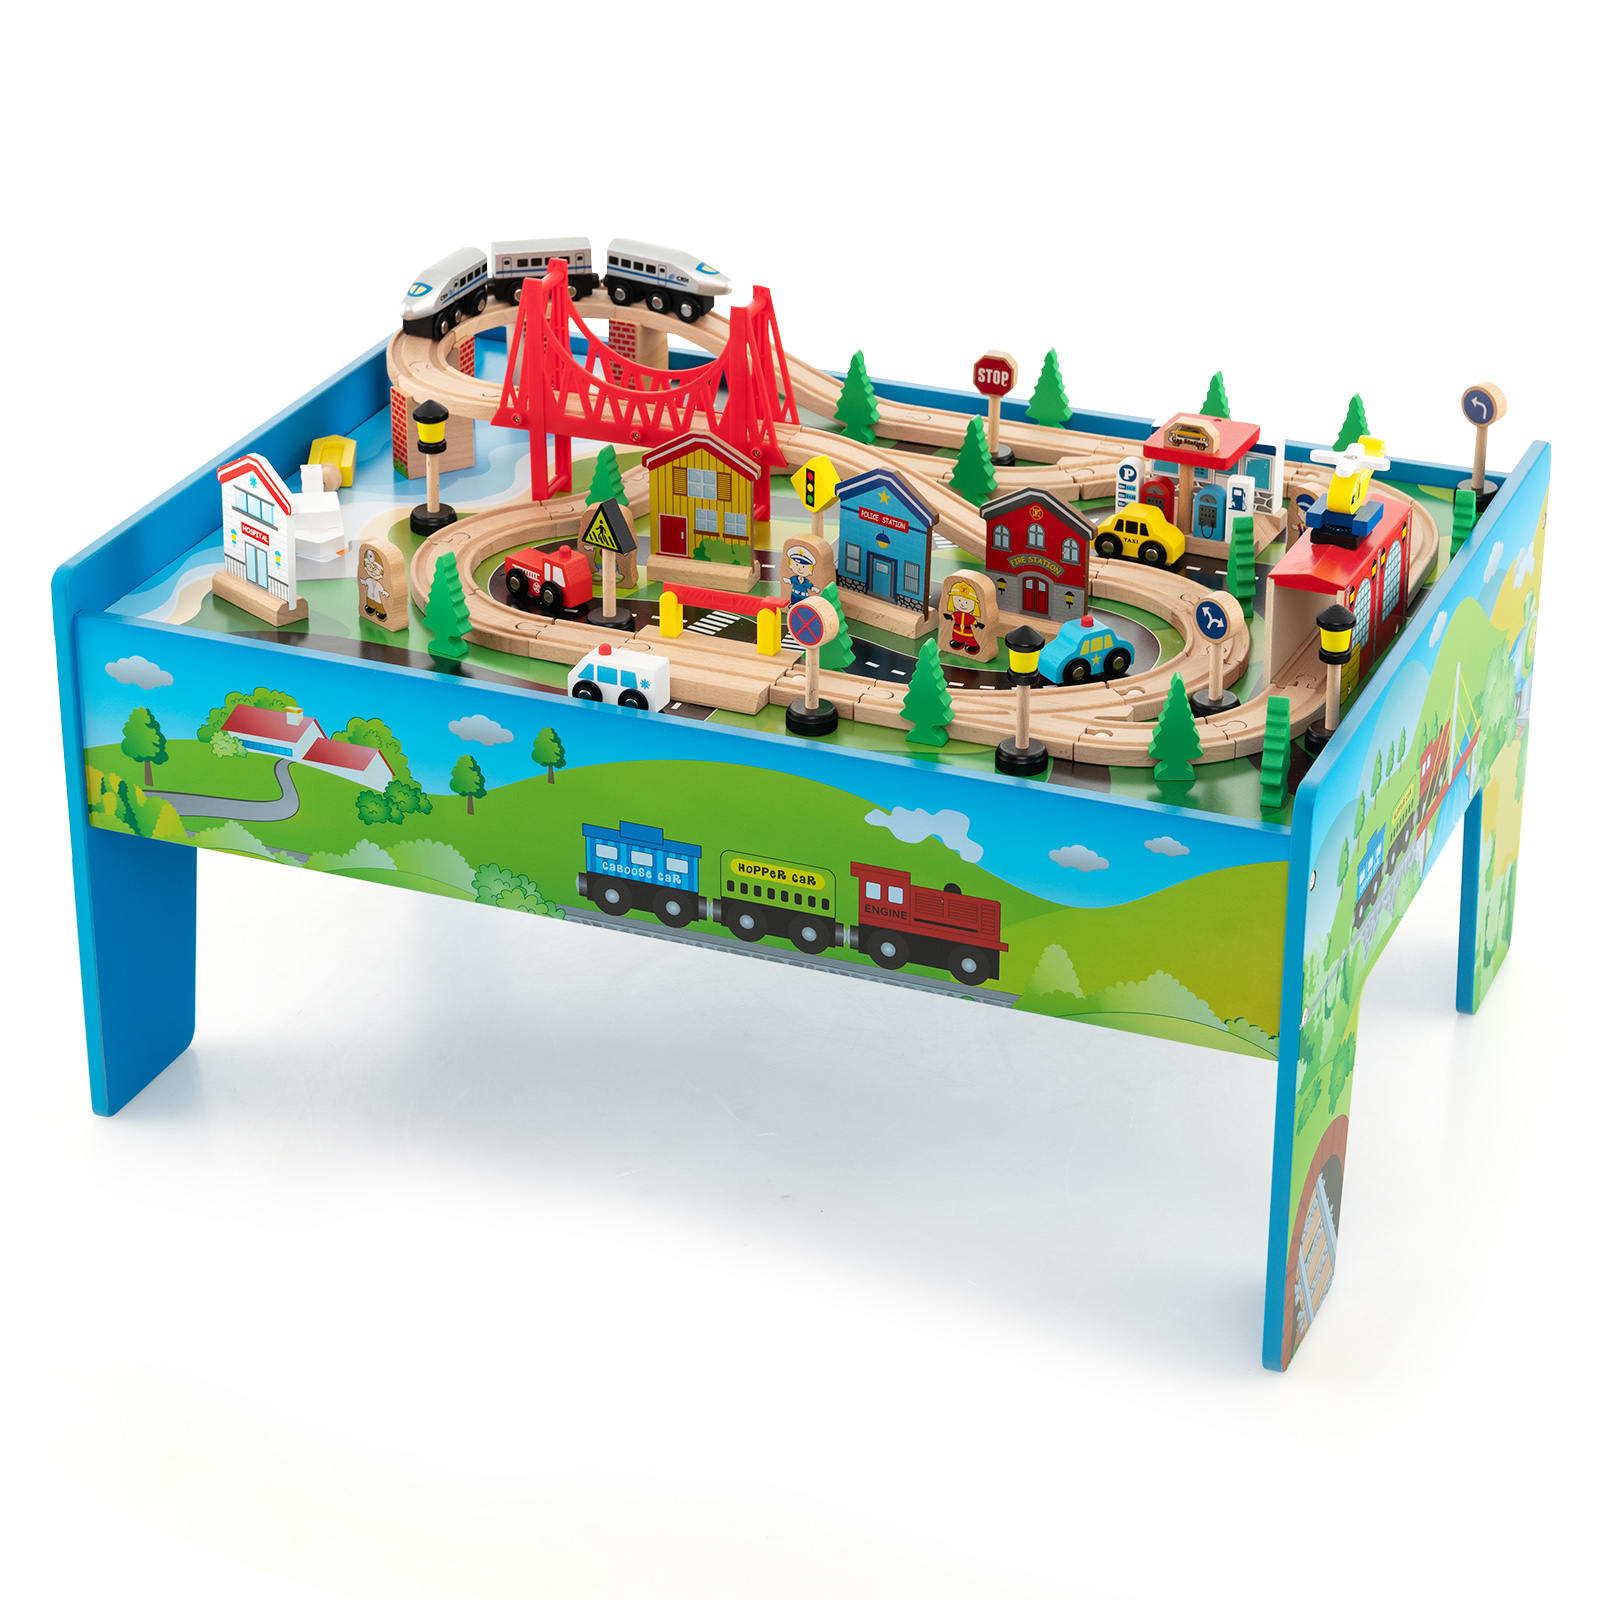 80-Piece Wooden Activity Playset with Reversible Tabletop